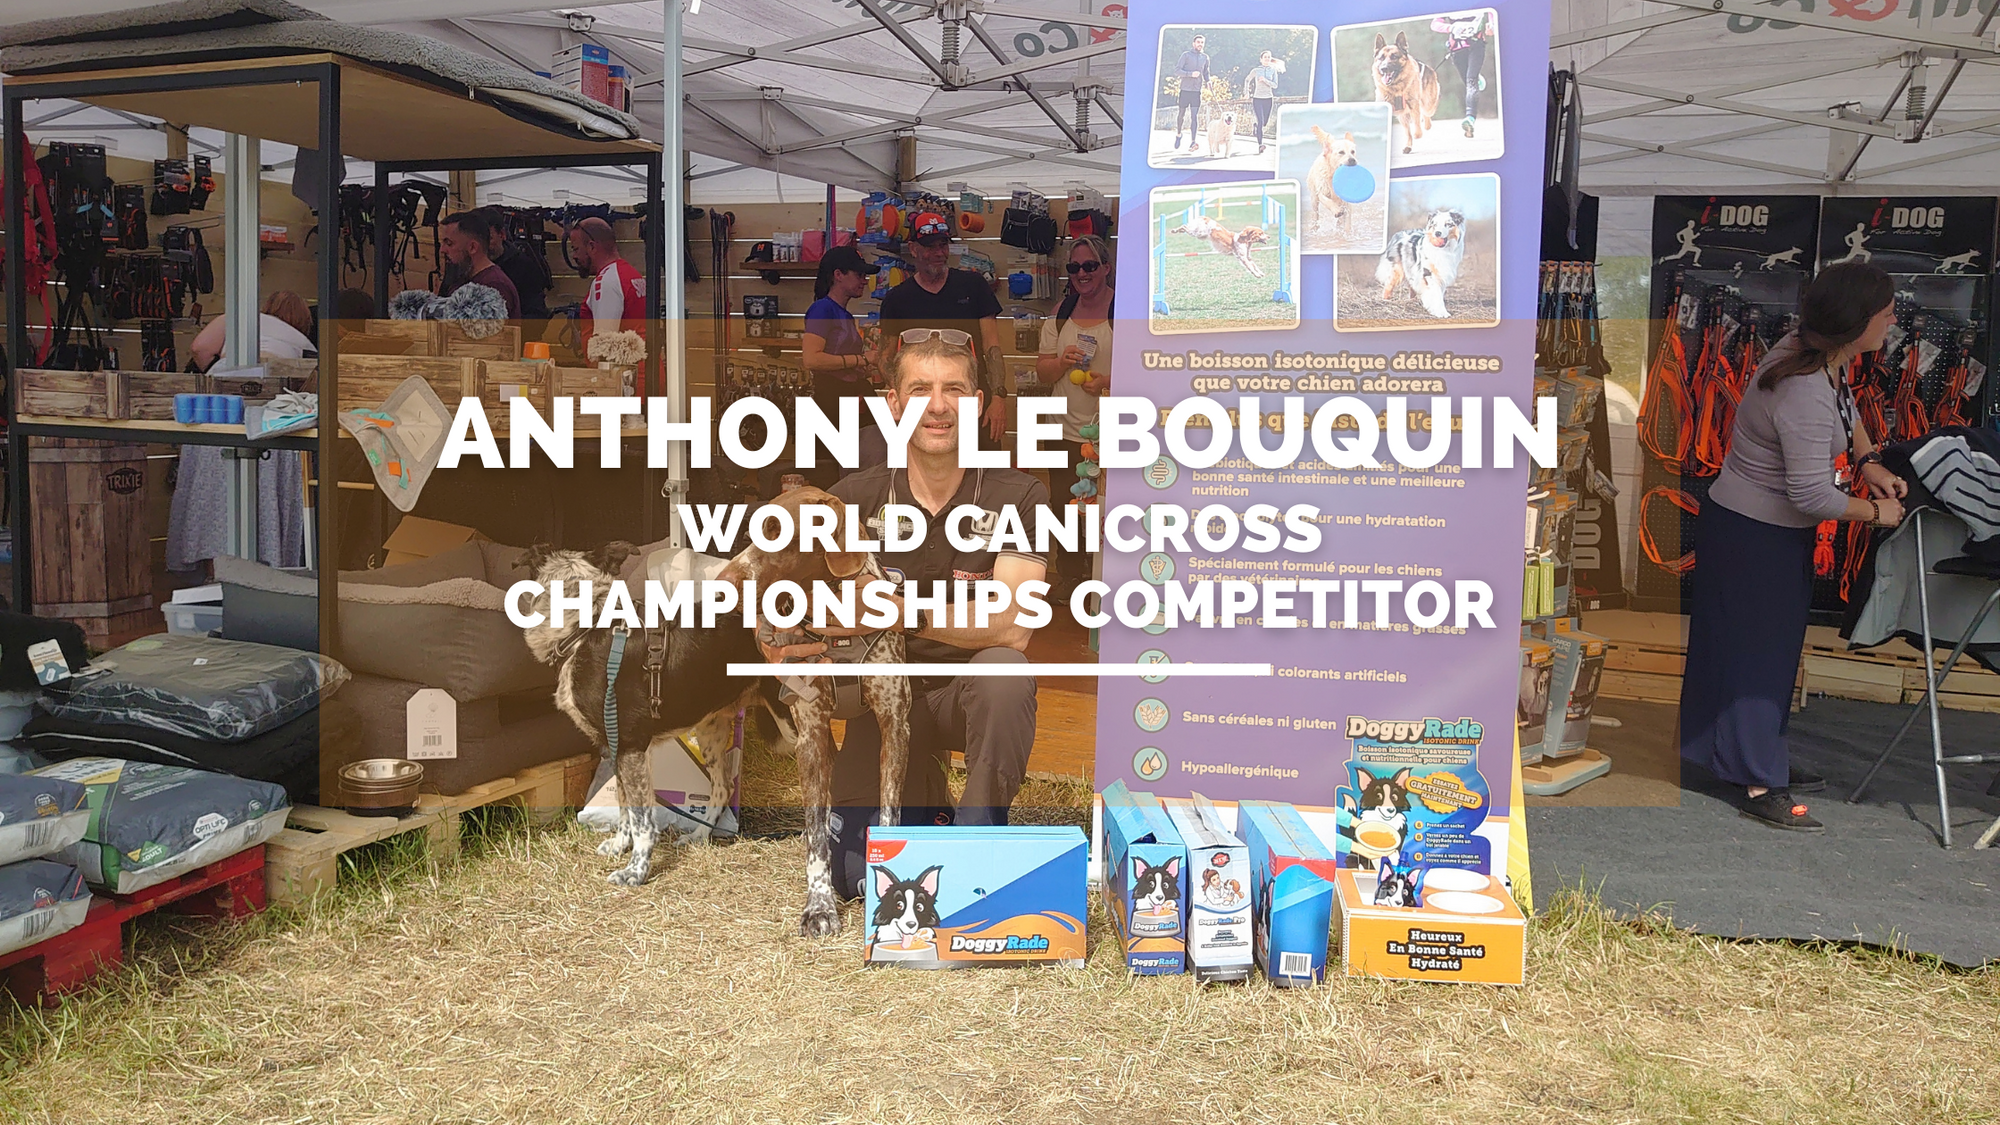 Anthony Le Bouquin, World Canicross Championships Competitor